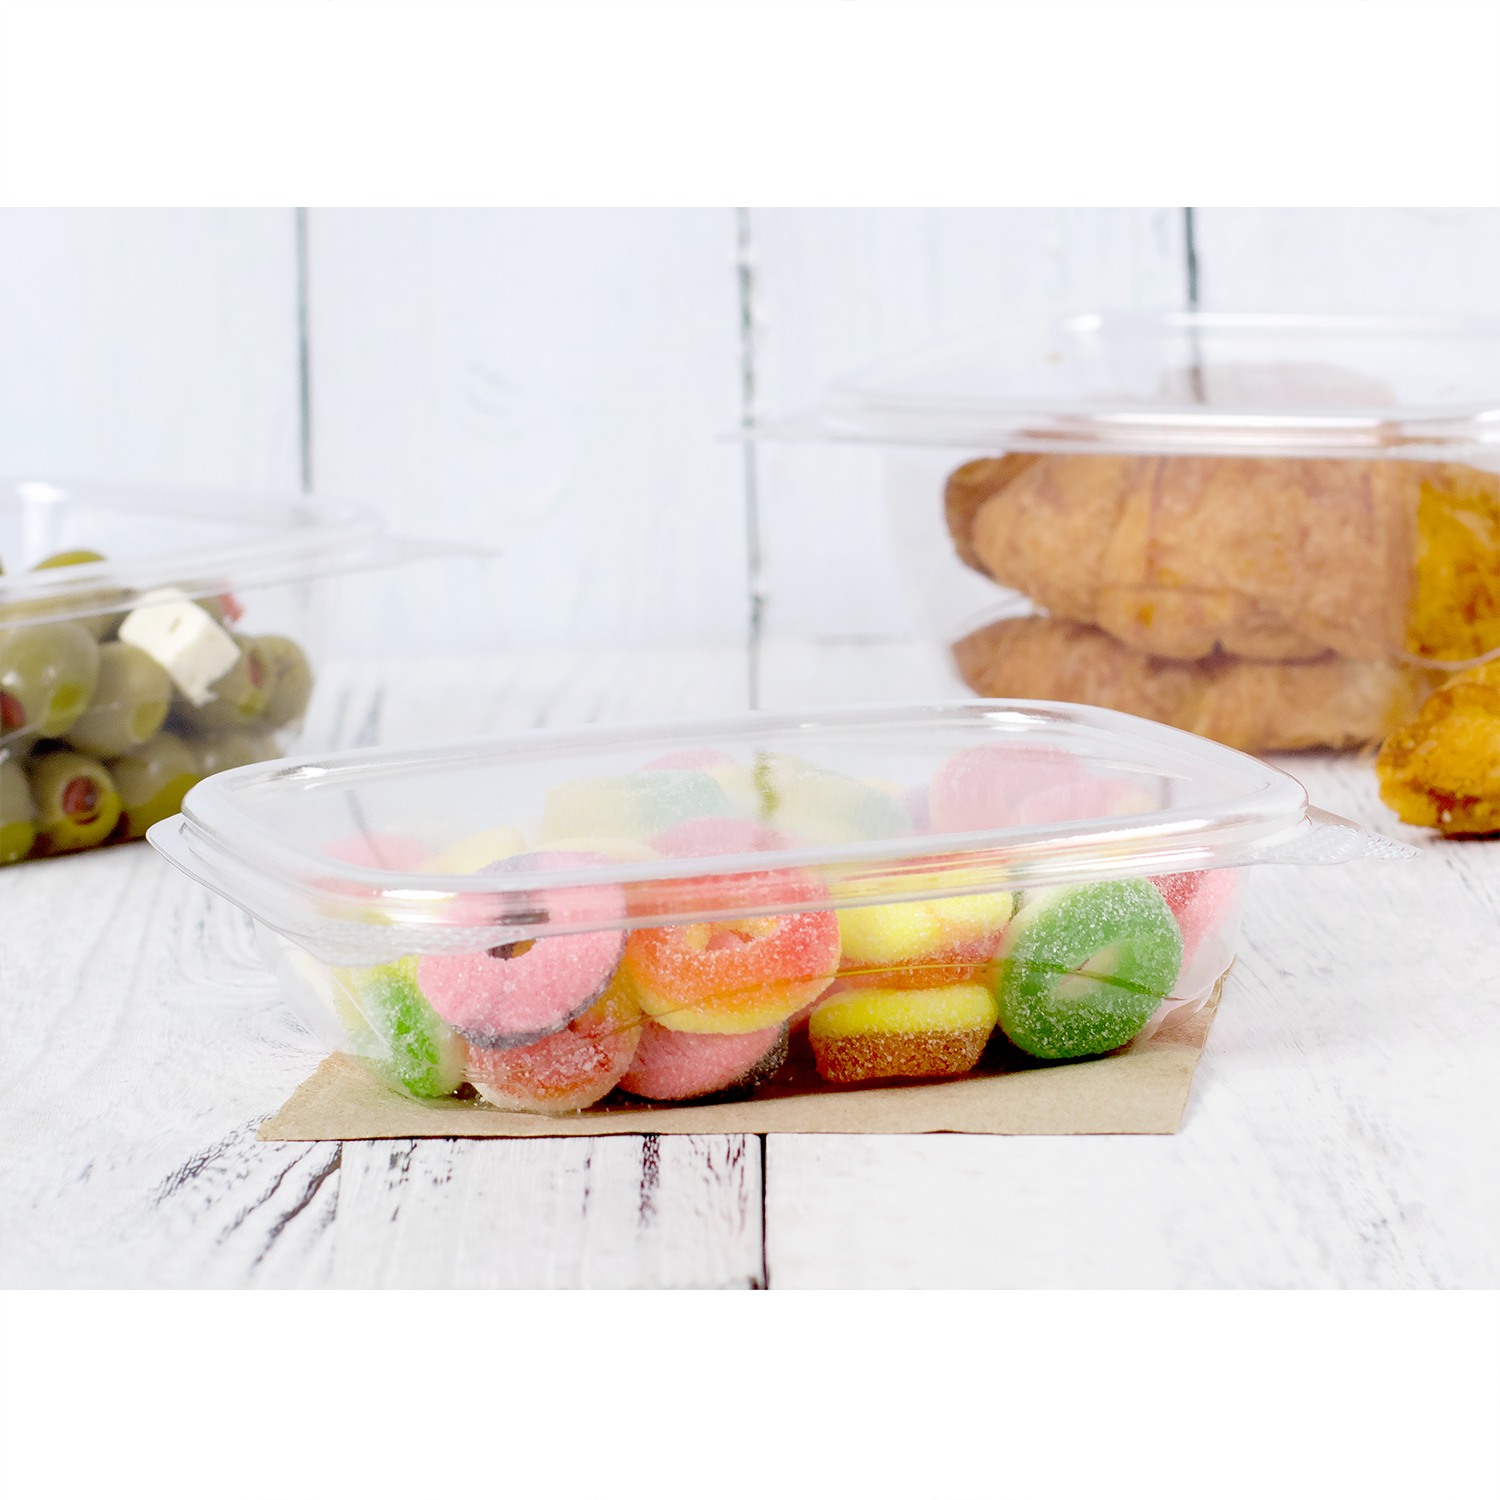 8 oz. Clear Hinged Deli Fruit Container 50/PK